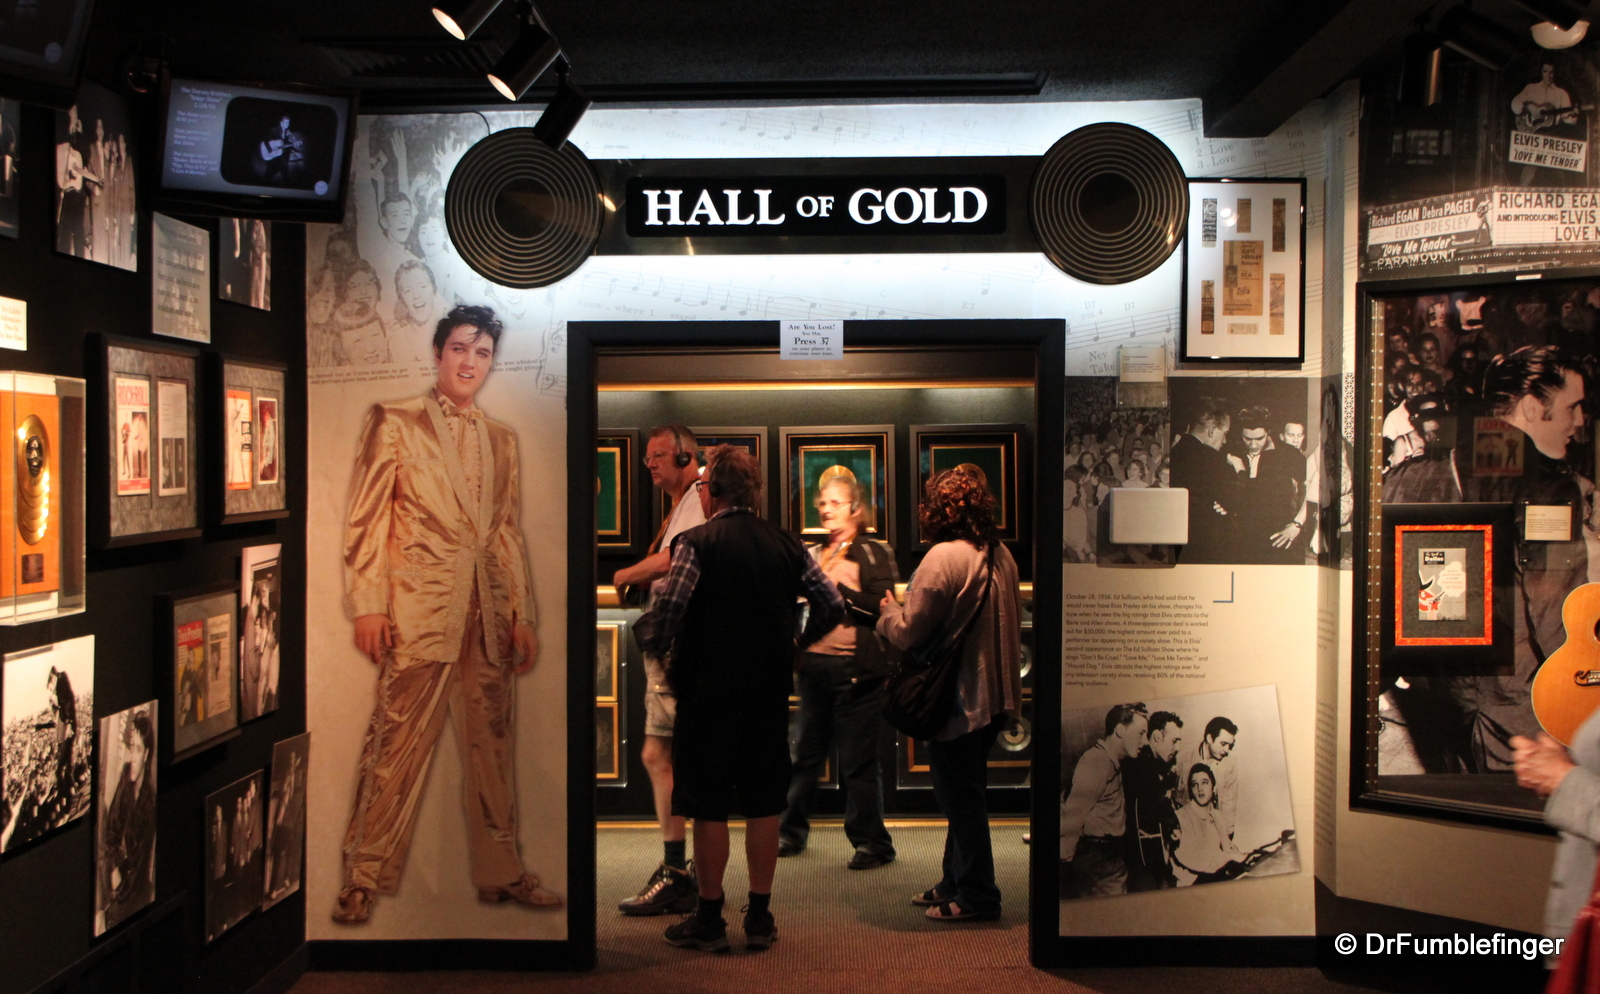 Entrance to the "Hall of Gold", Graceland